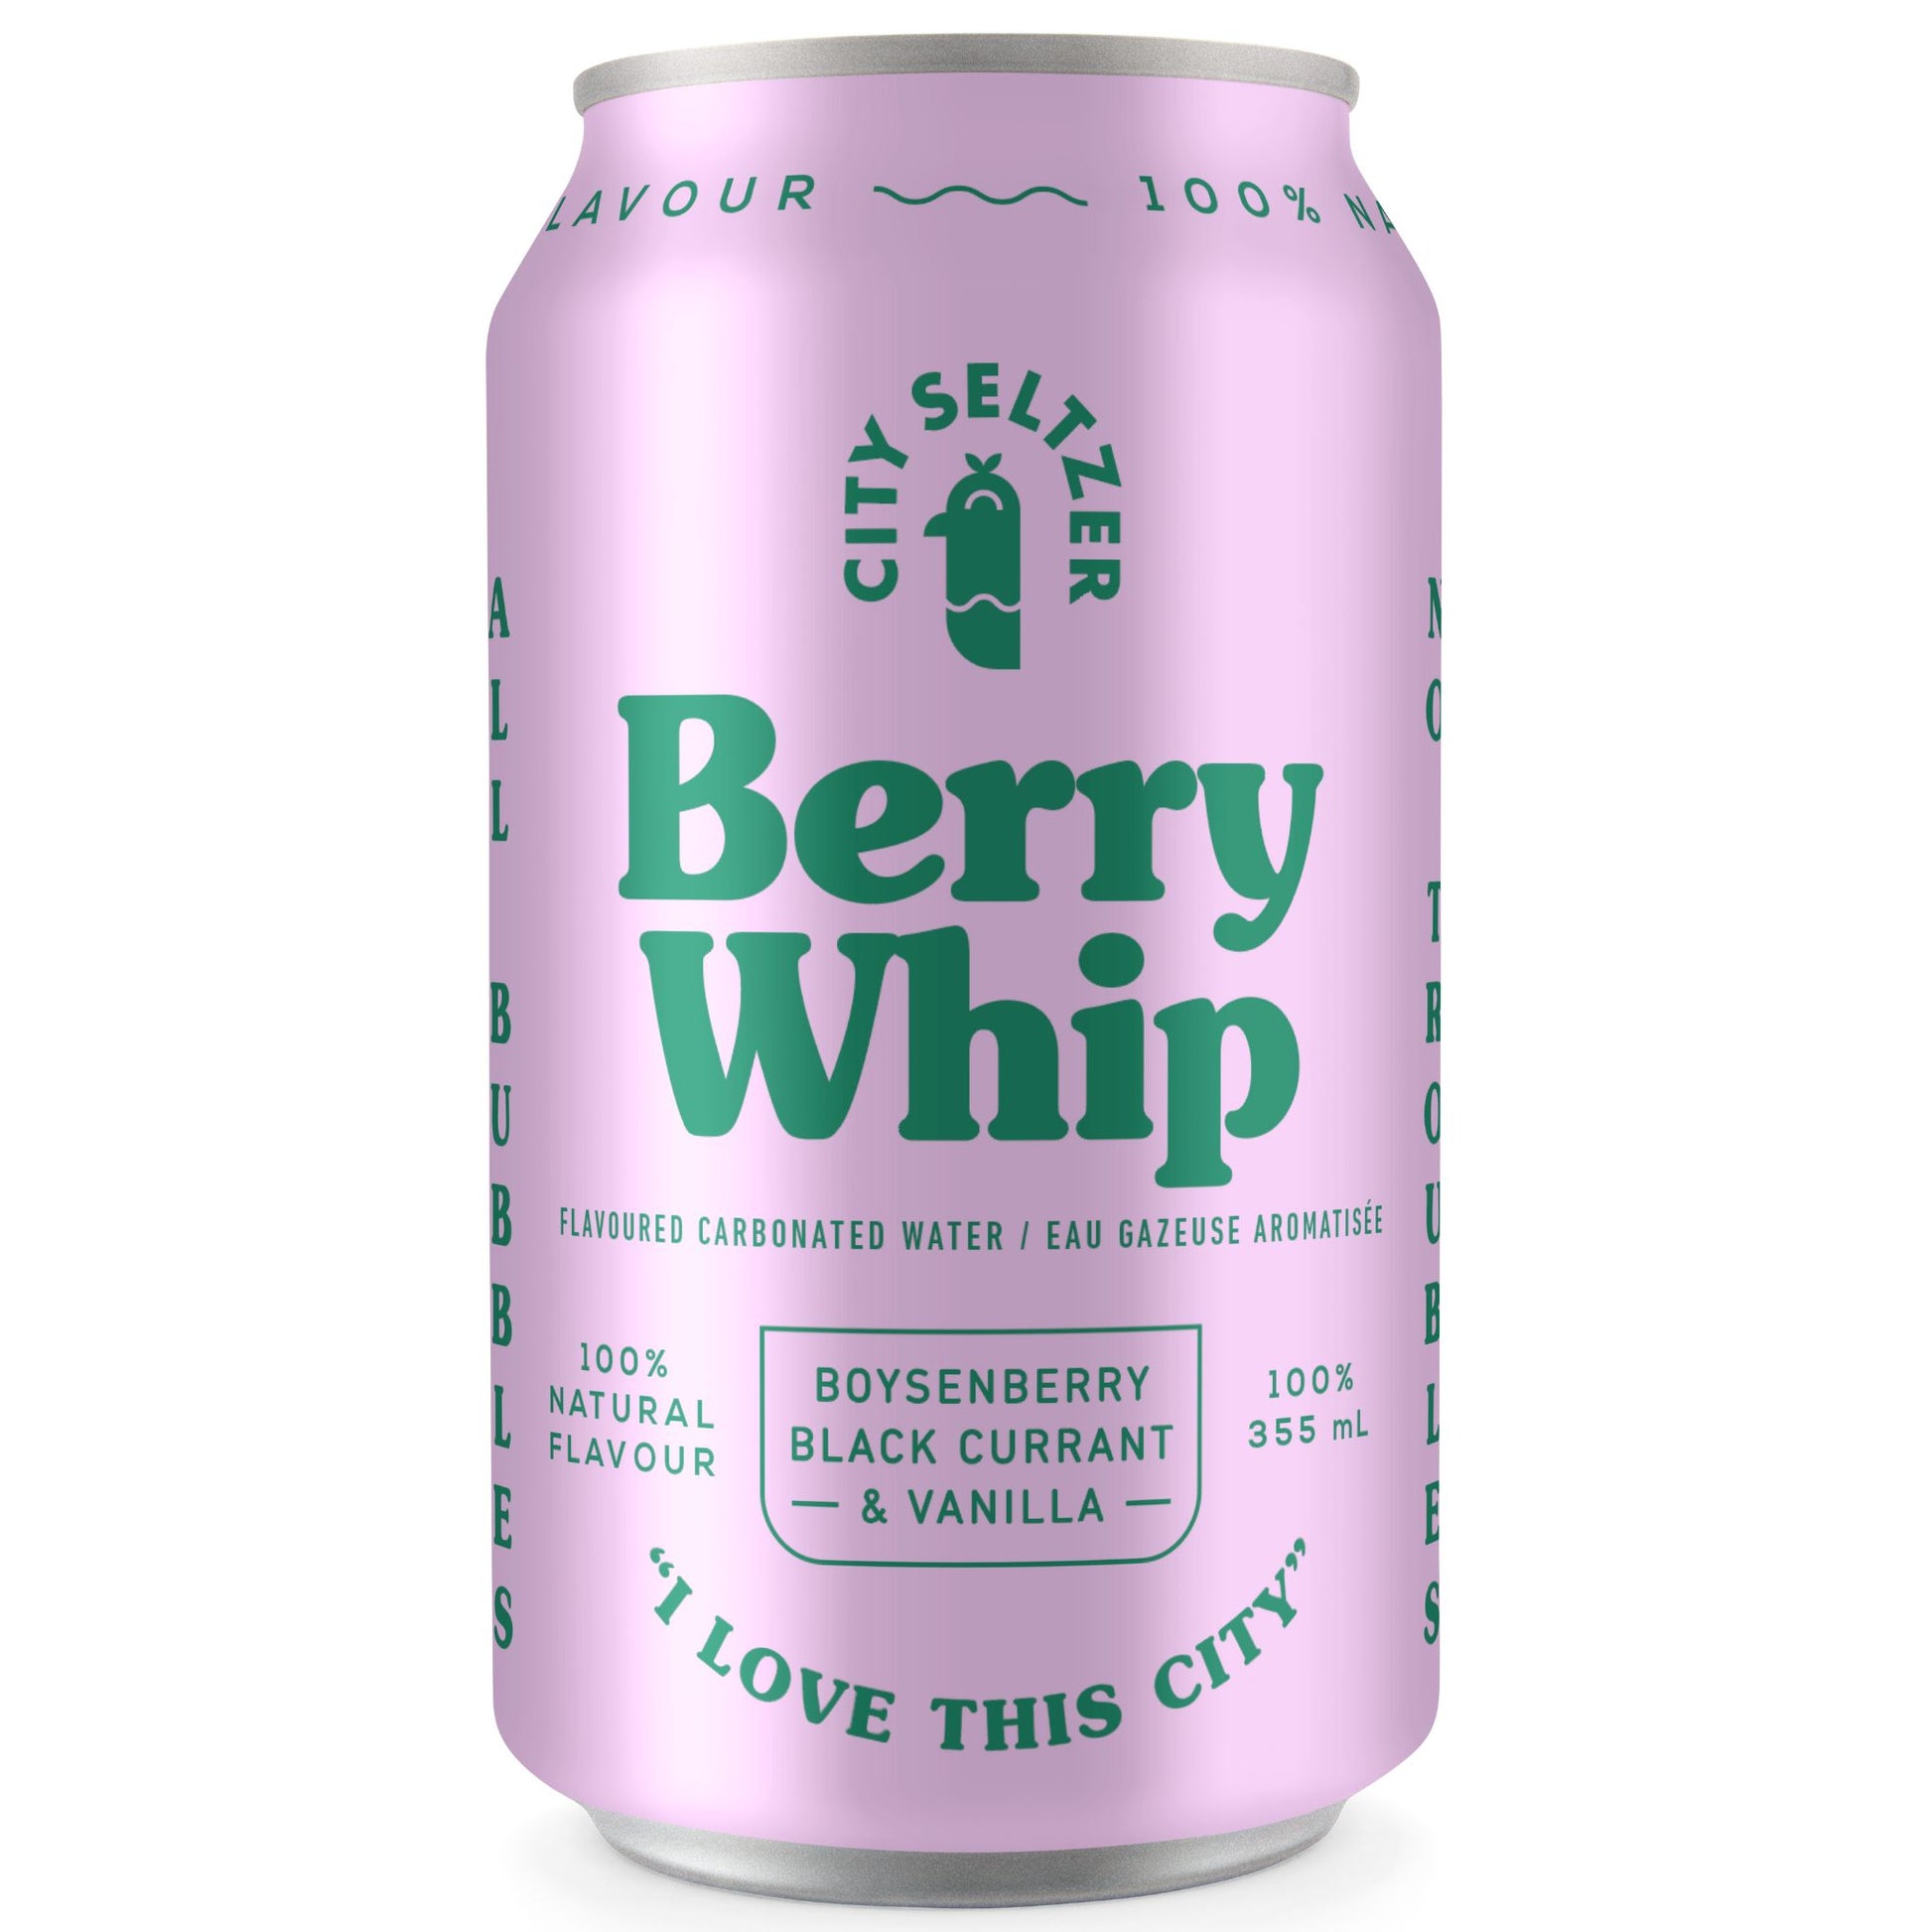 City Seltzer Berry Whip is available at Knyota Drinks in Ottawa.